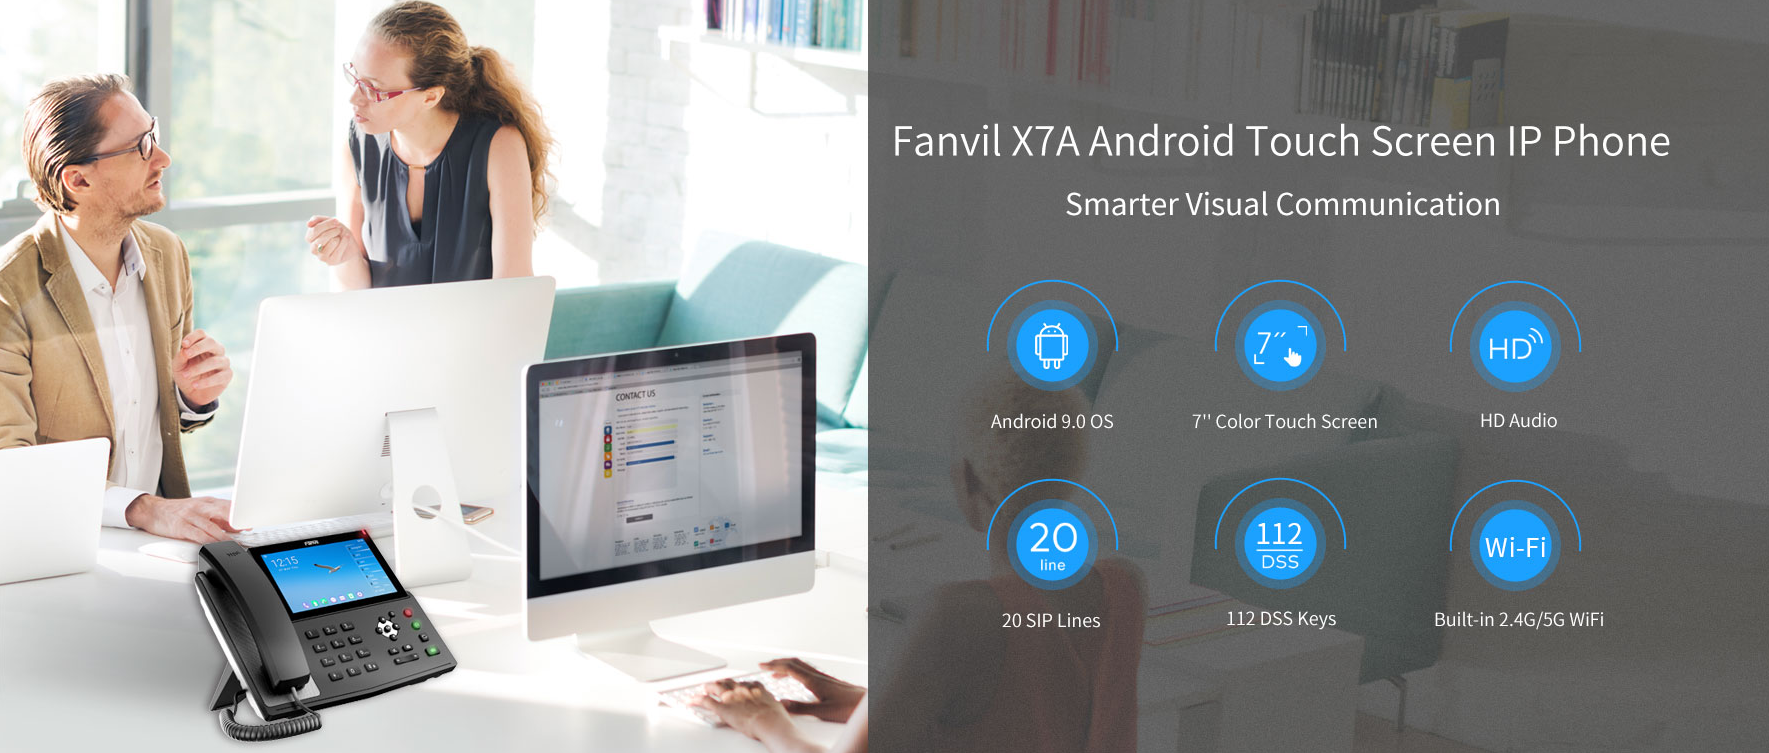 Fanvil X7A Android Touch Screen IP Phone - Hong Kong Supplier - Sipmax Technology Group 